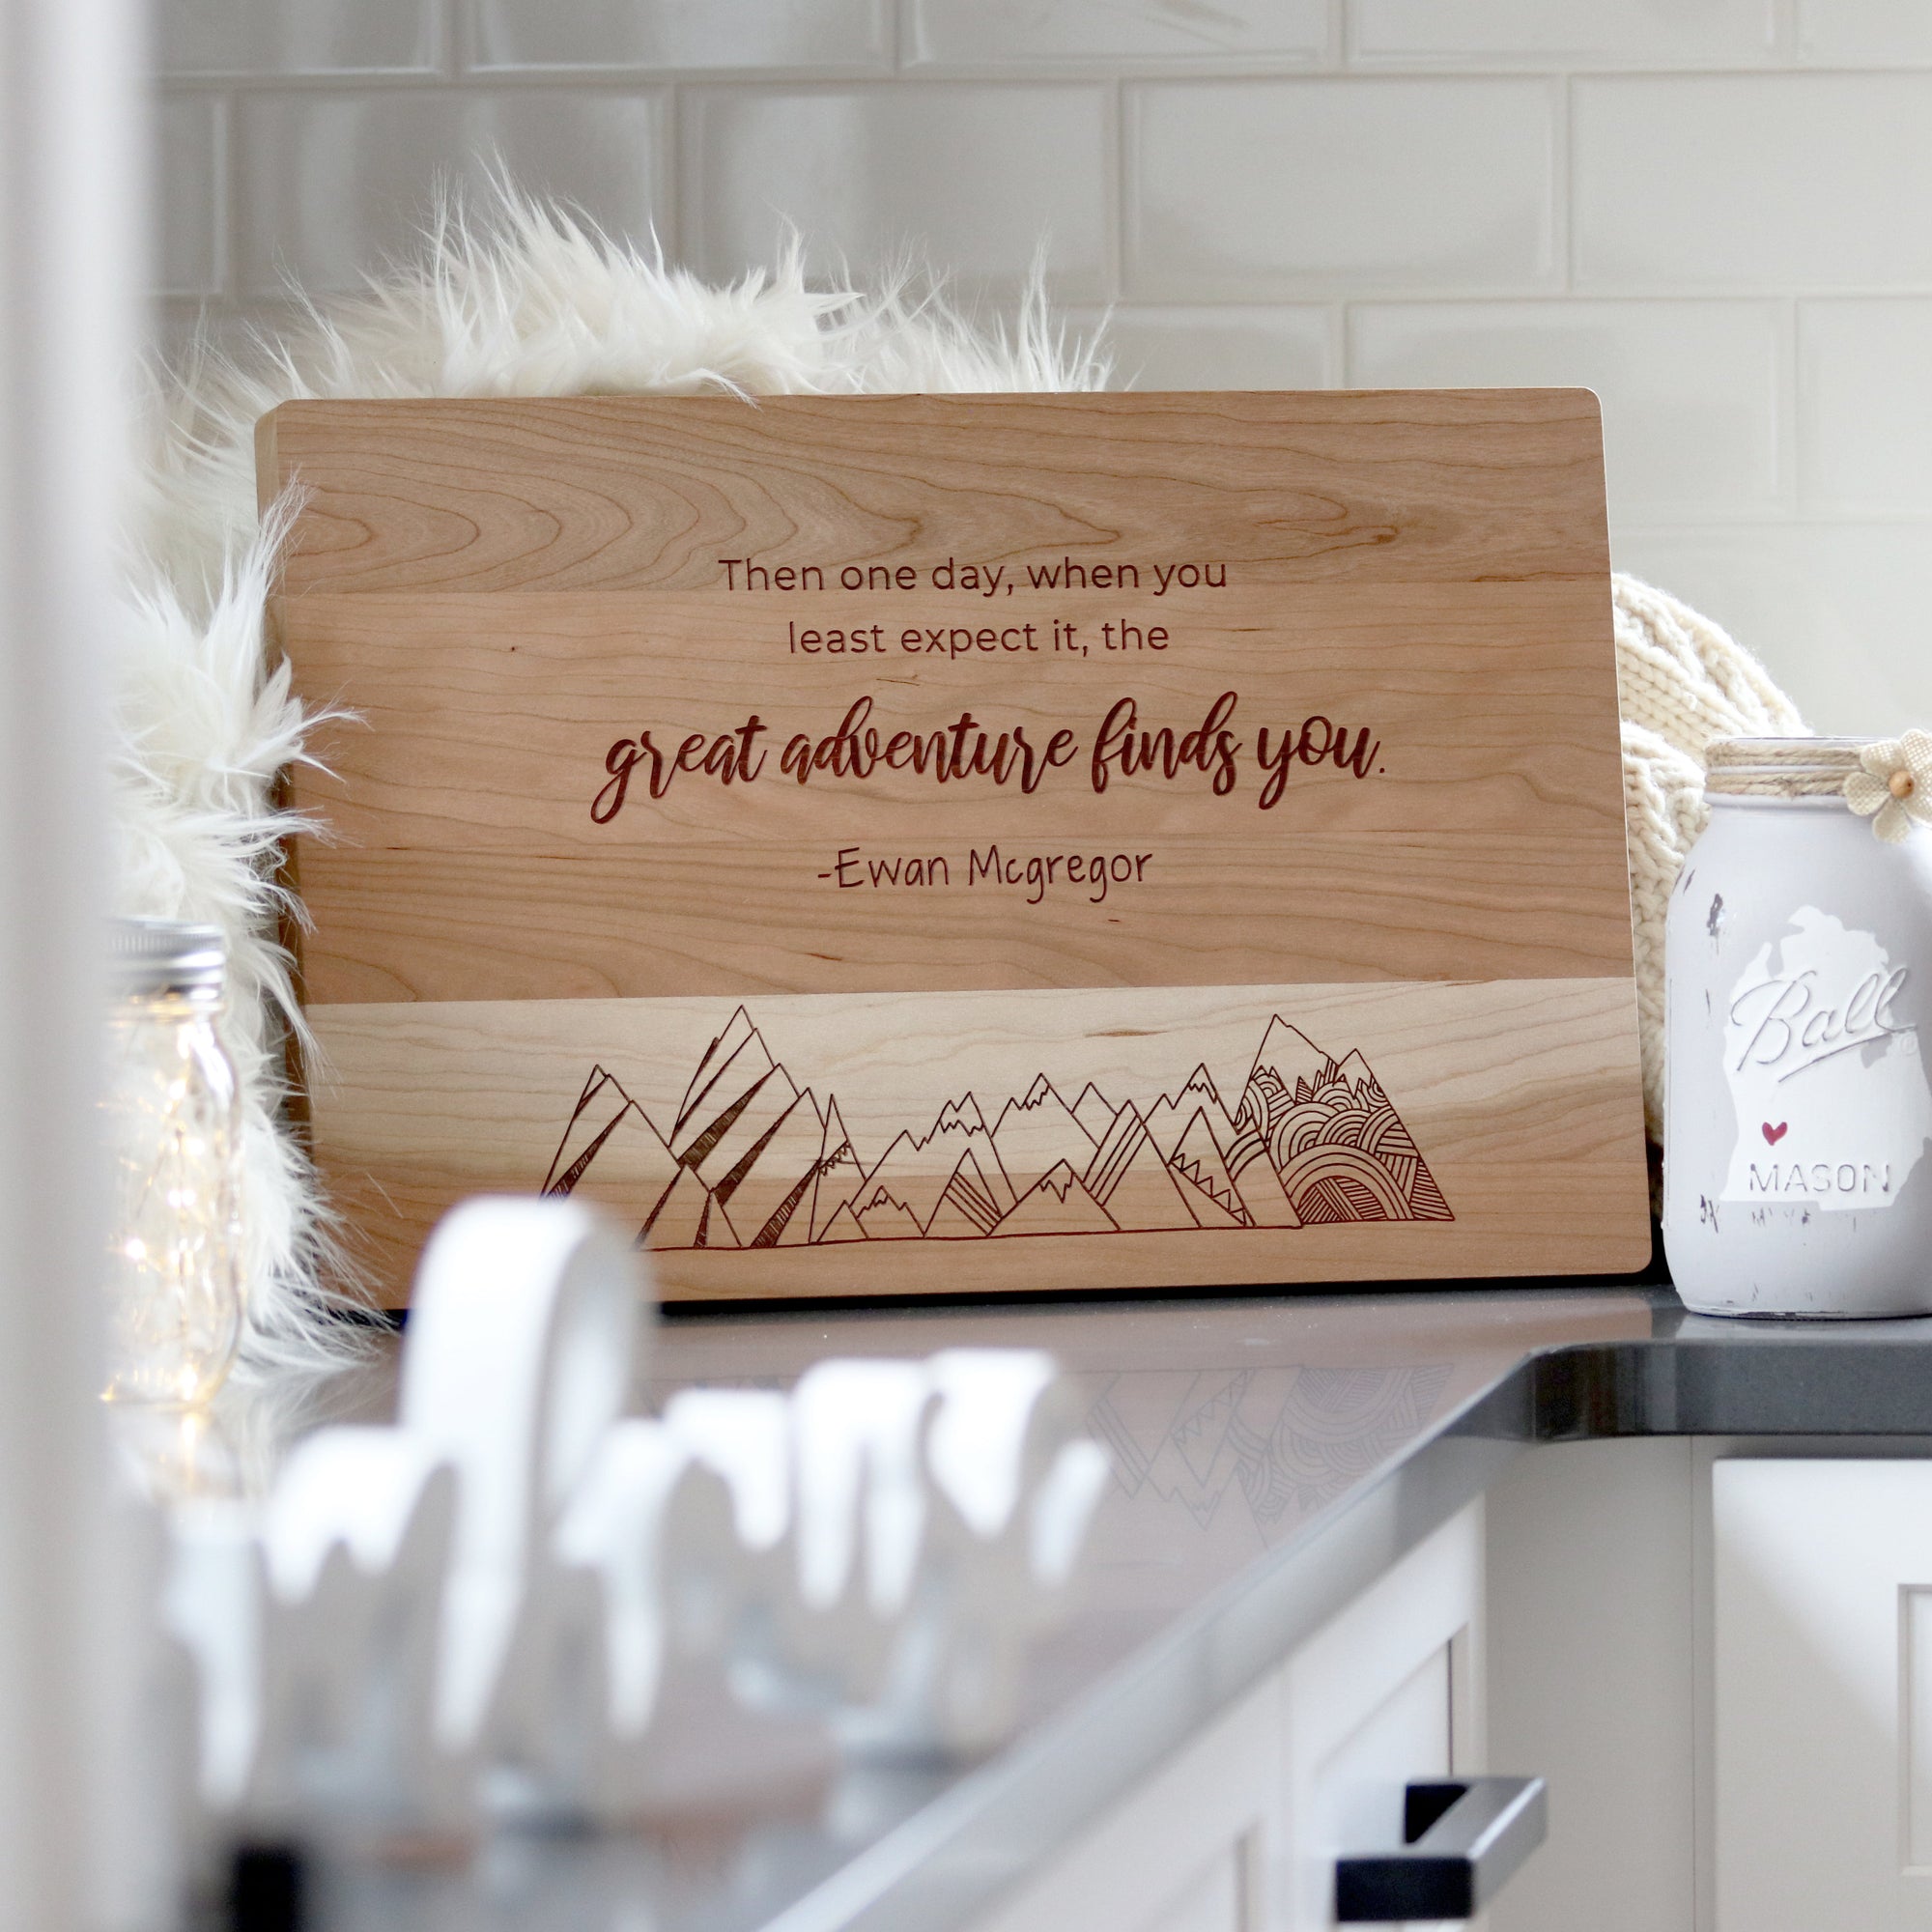 Laser Engraved Personalized Cutting Board,  Inspirational Quote, Wedding Gift, Great Adventure, LGC10475